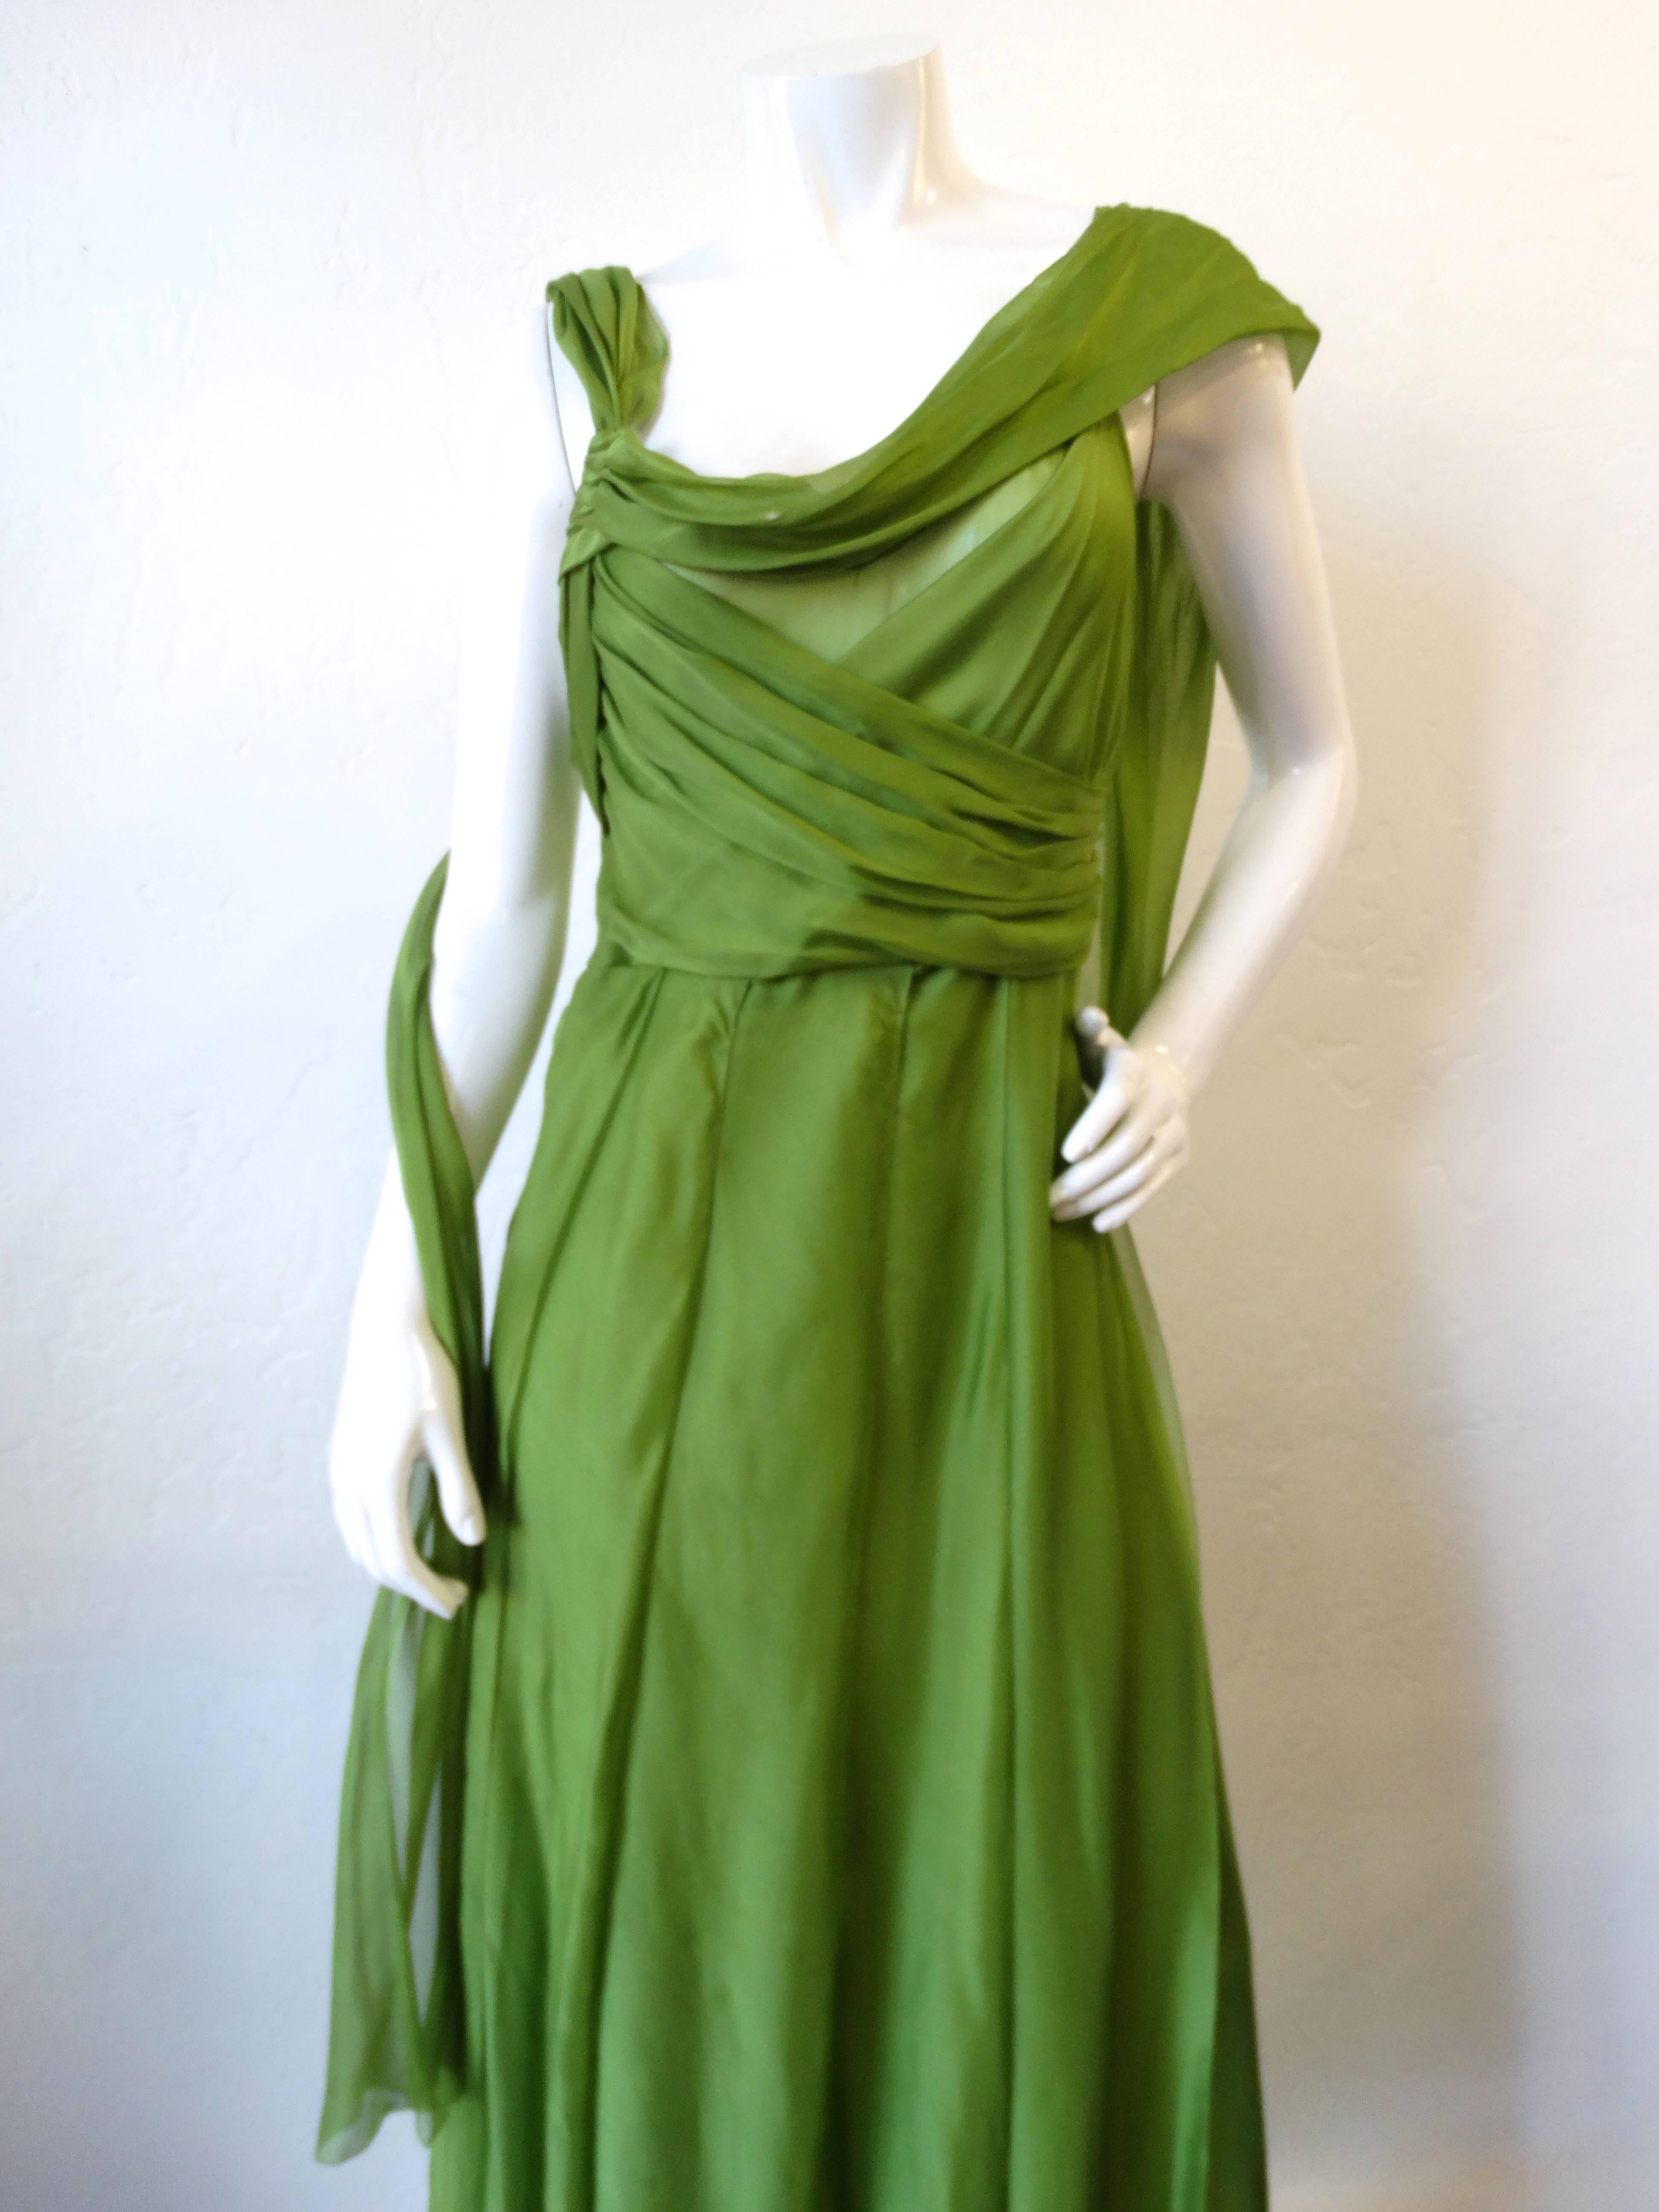 The most incredible goddess dress from Alberta Ferreti! Made of a silk chiffon fabric in a lively green color, draped to flatter the natural figure. Layered, almost carwash style skirt with slits up to the knee throughout. Sash suspended from either